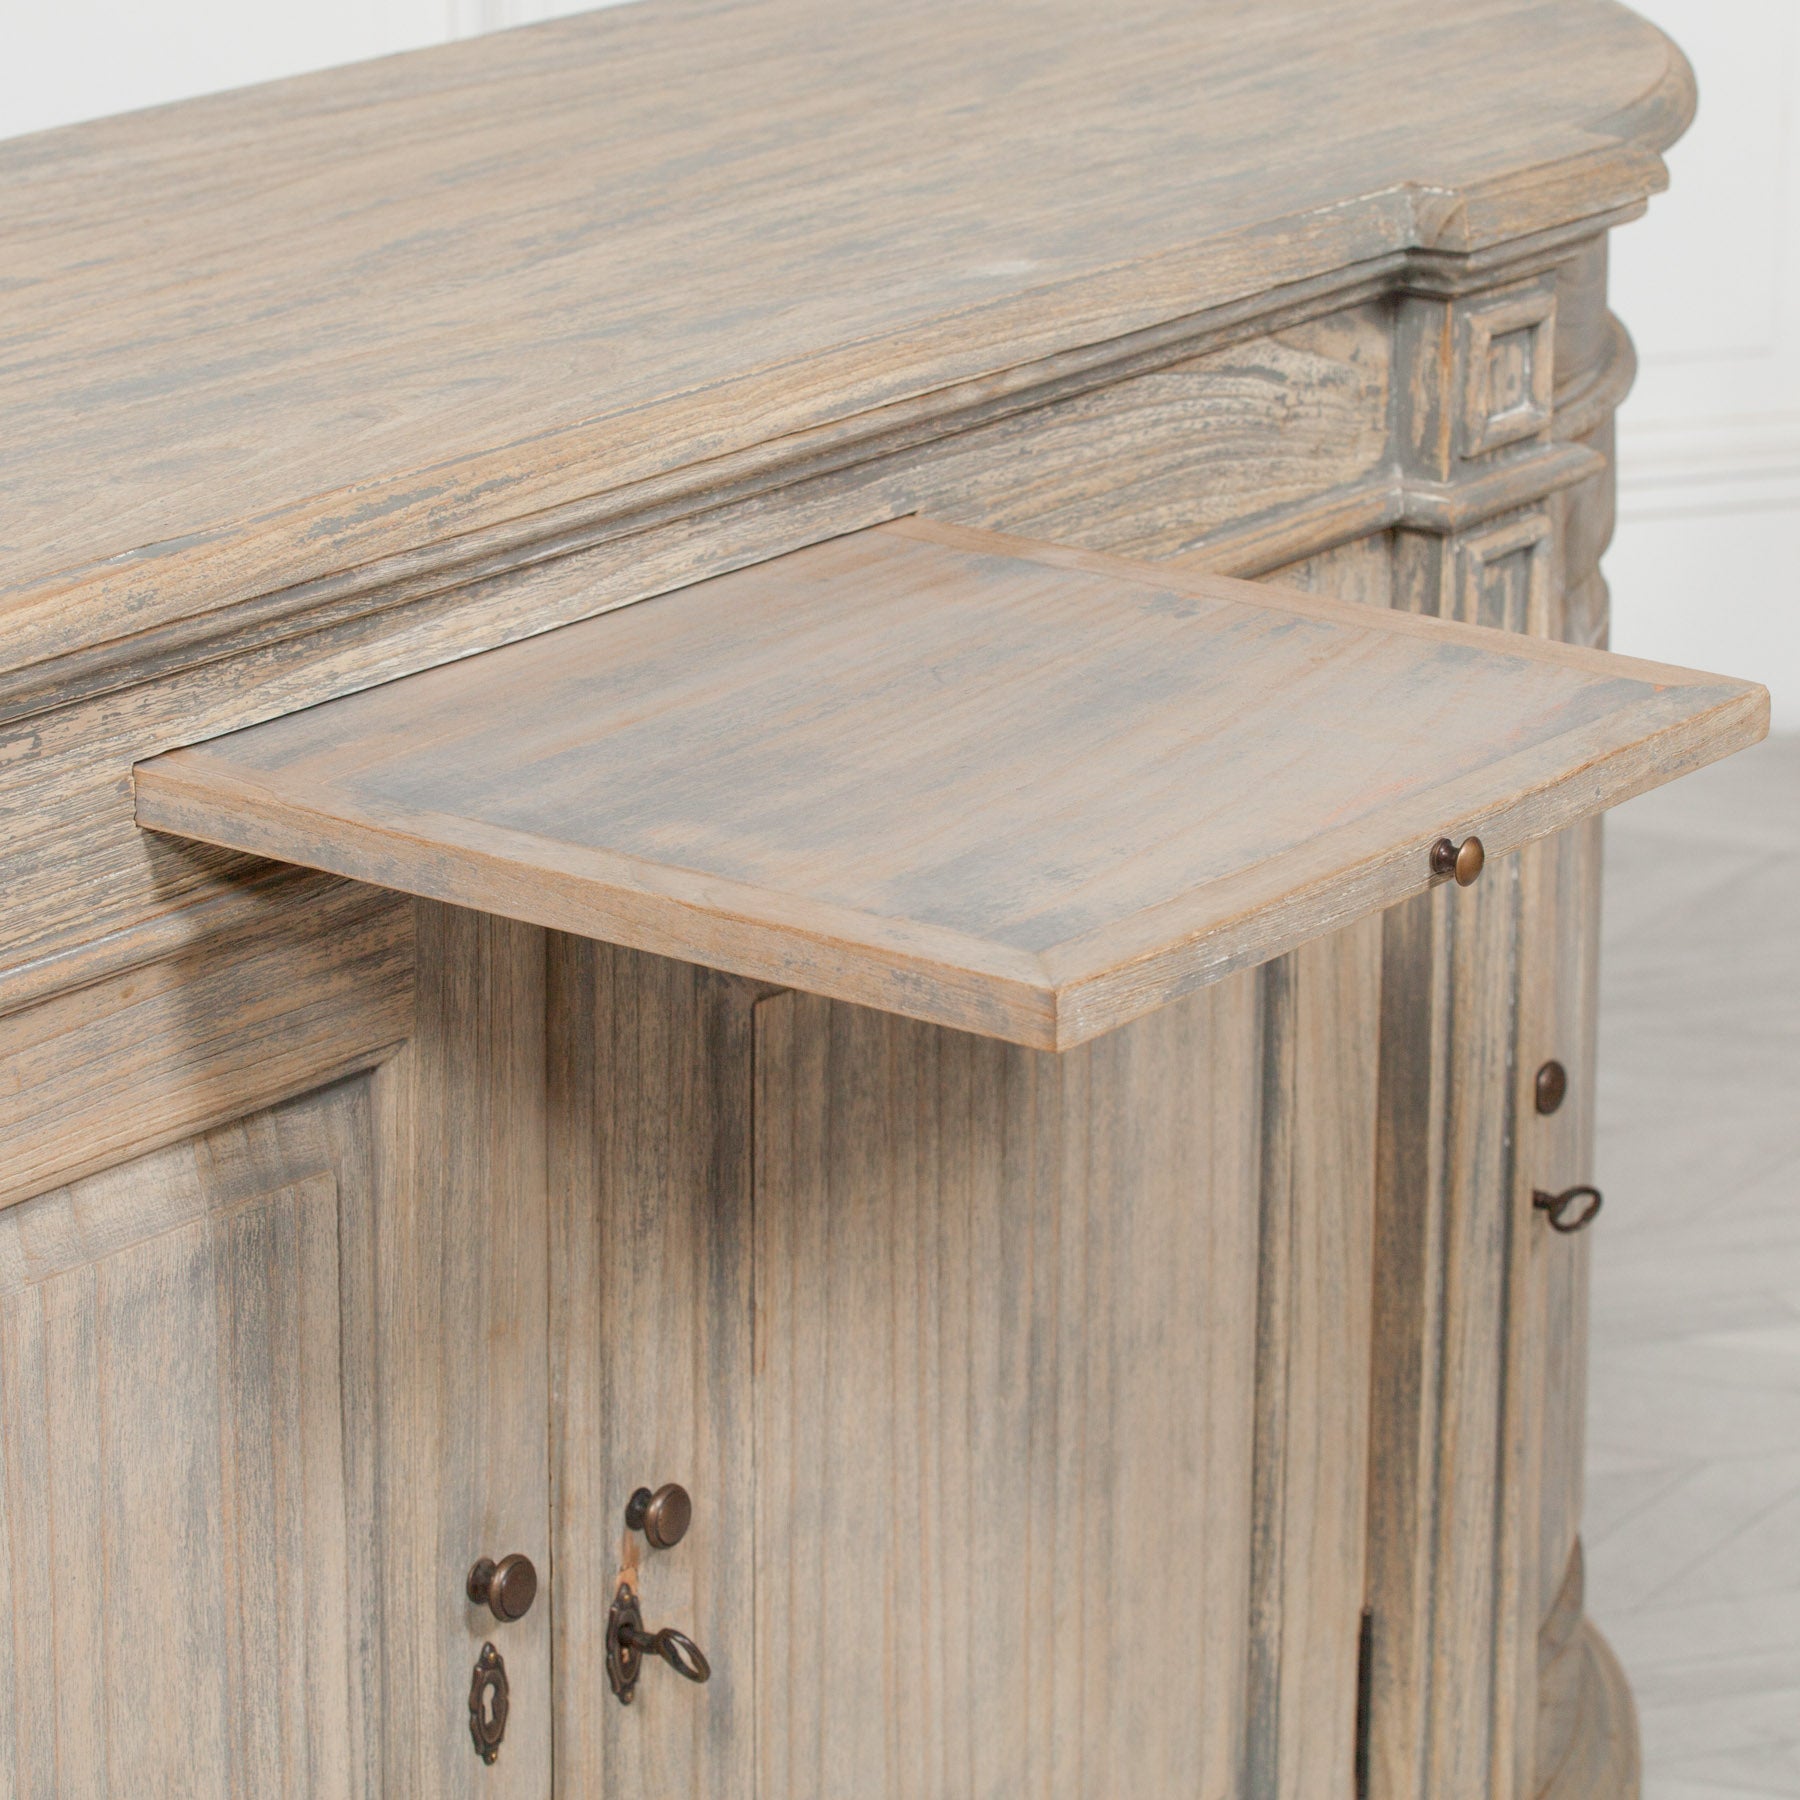 Rustic Wooden Large Buffet Sideboard